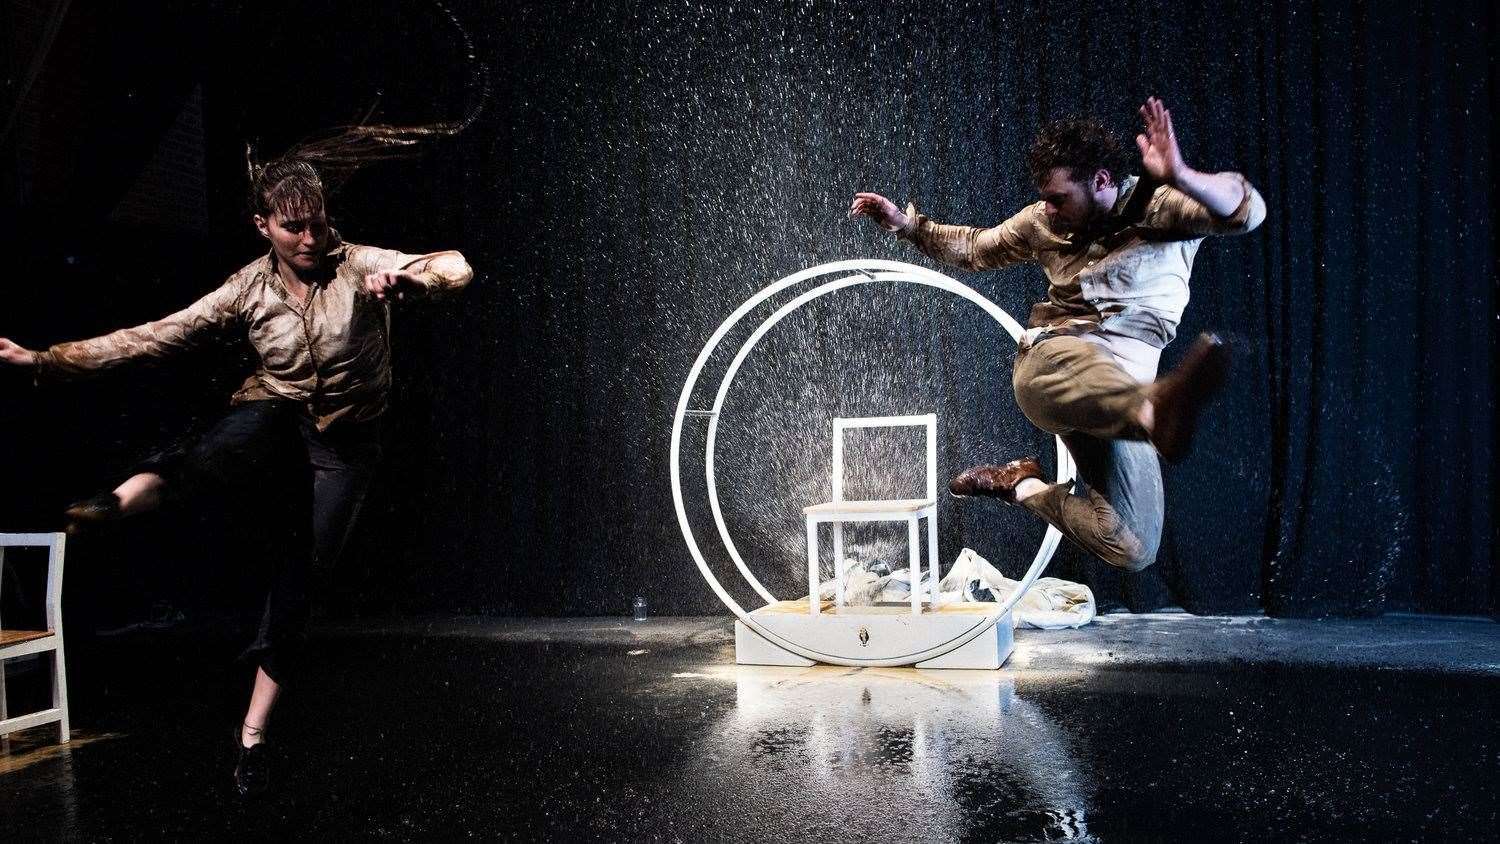 Barney White and Gabbie Cook performing an Acrojou project